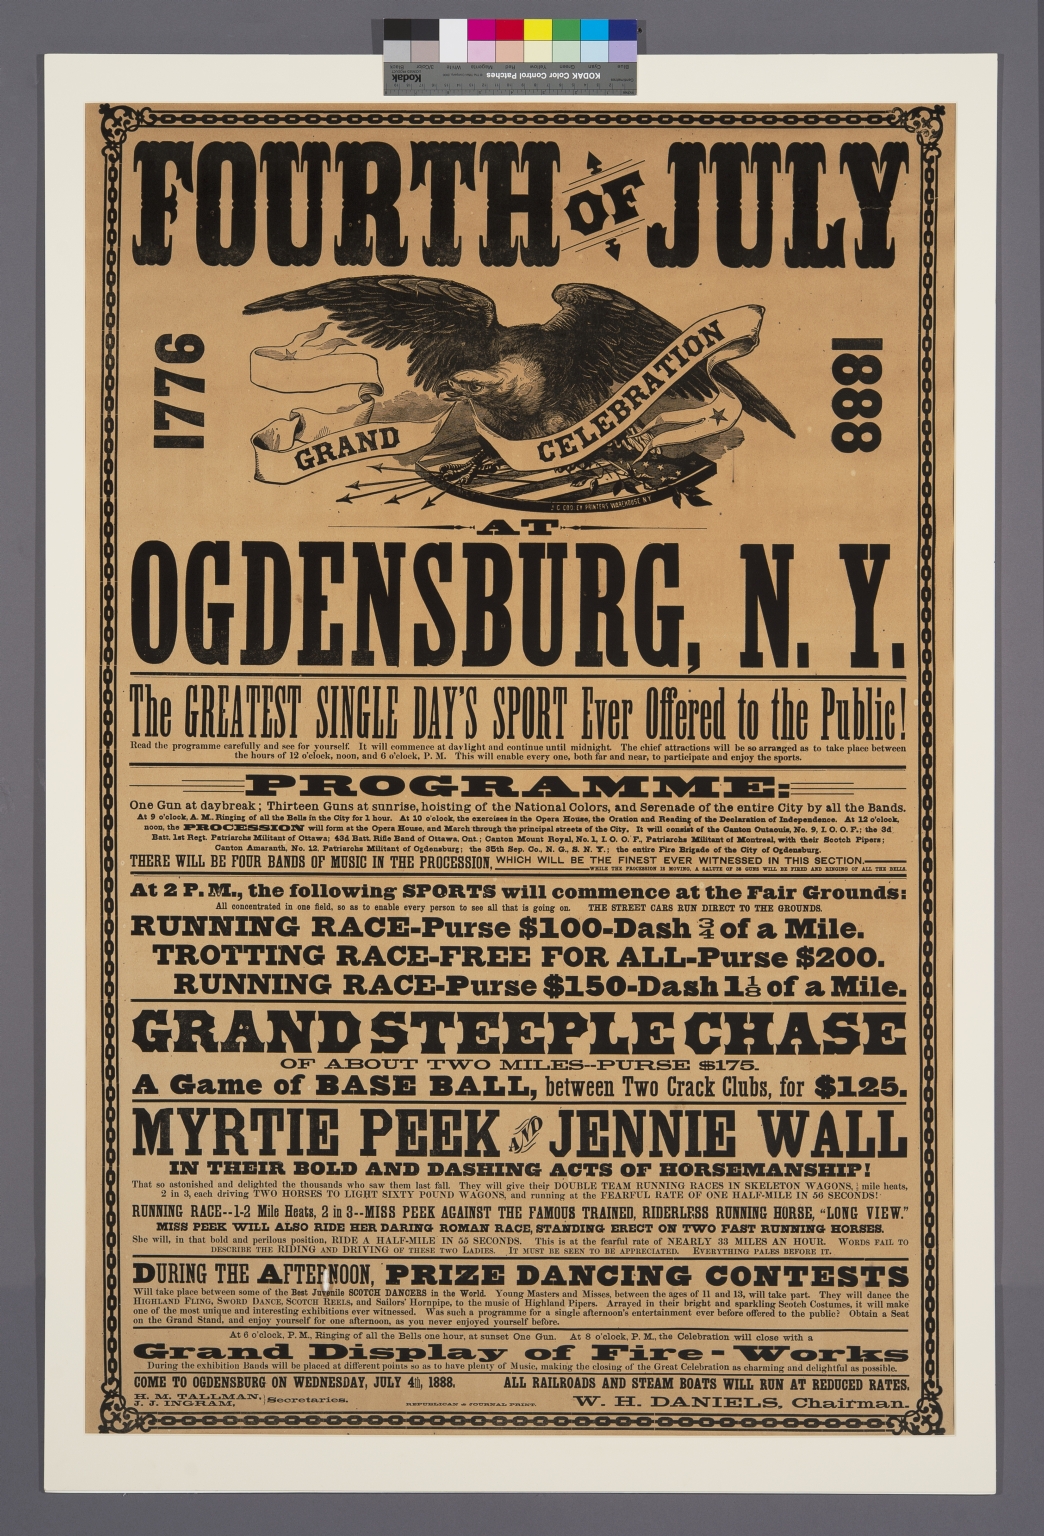 Fourth of July grand celebration at Ogdensburg, N.Y. : the greatest single day's sport ever offered to the public! ... Come to Ogdensburg on Wednesday July 4th, 1888